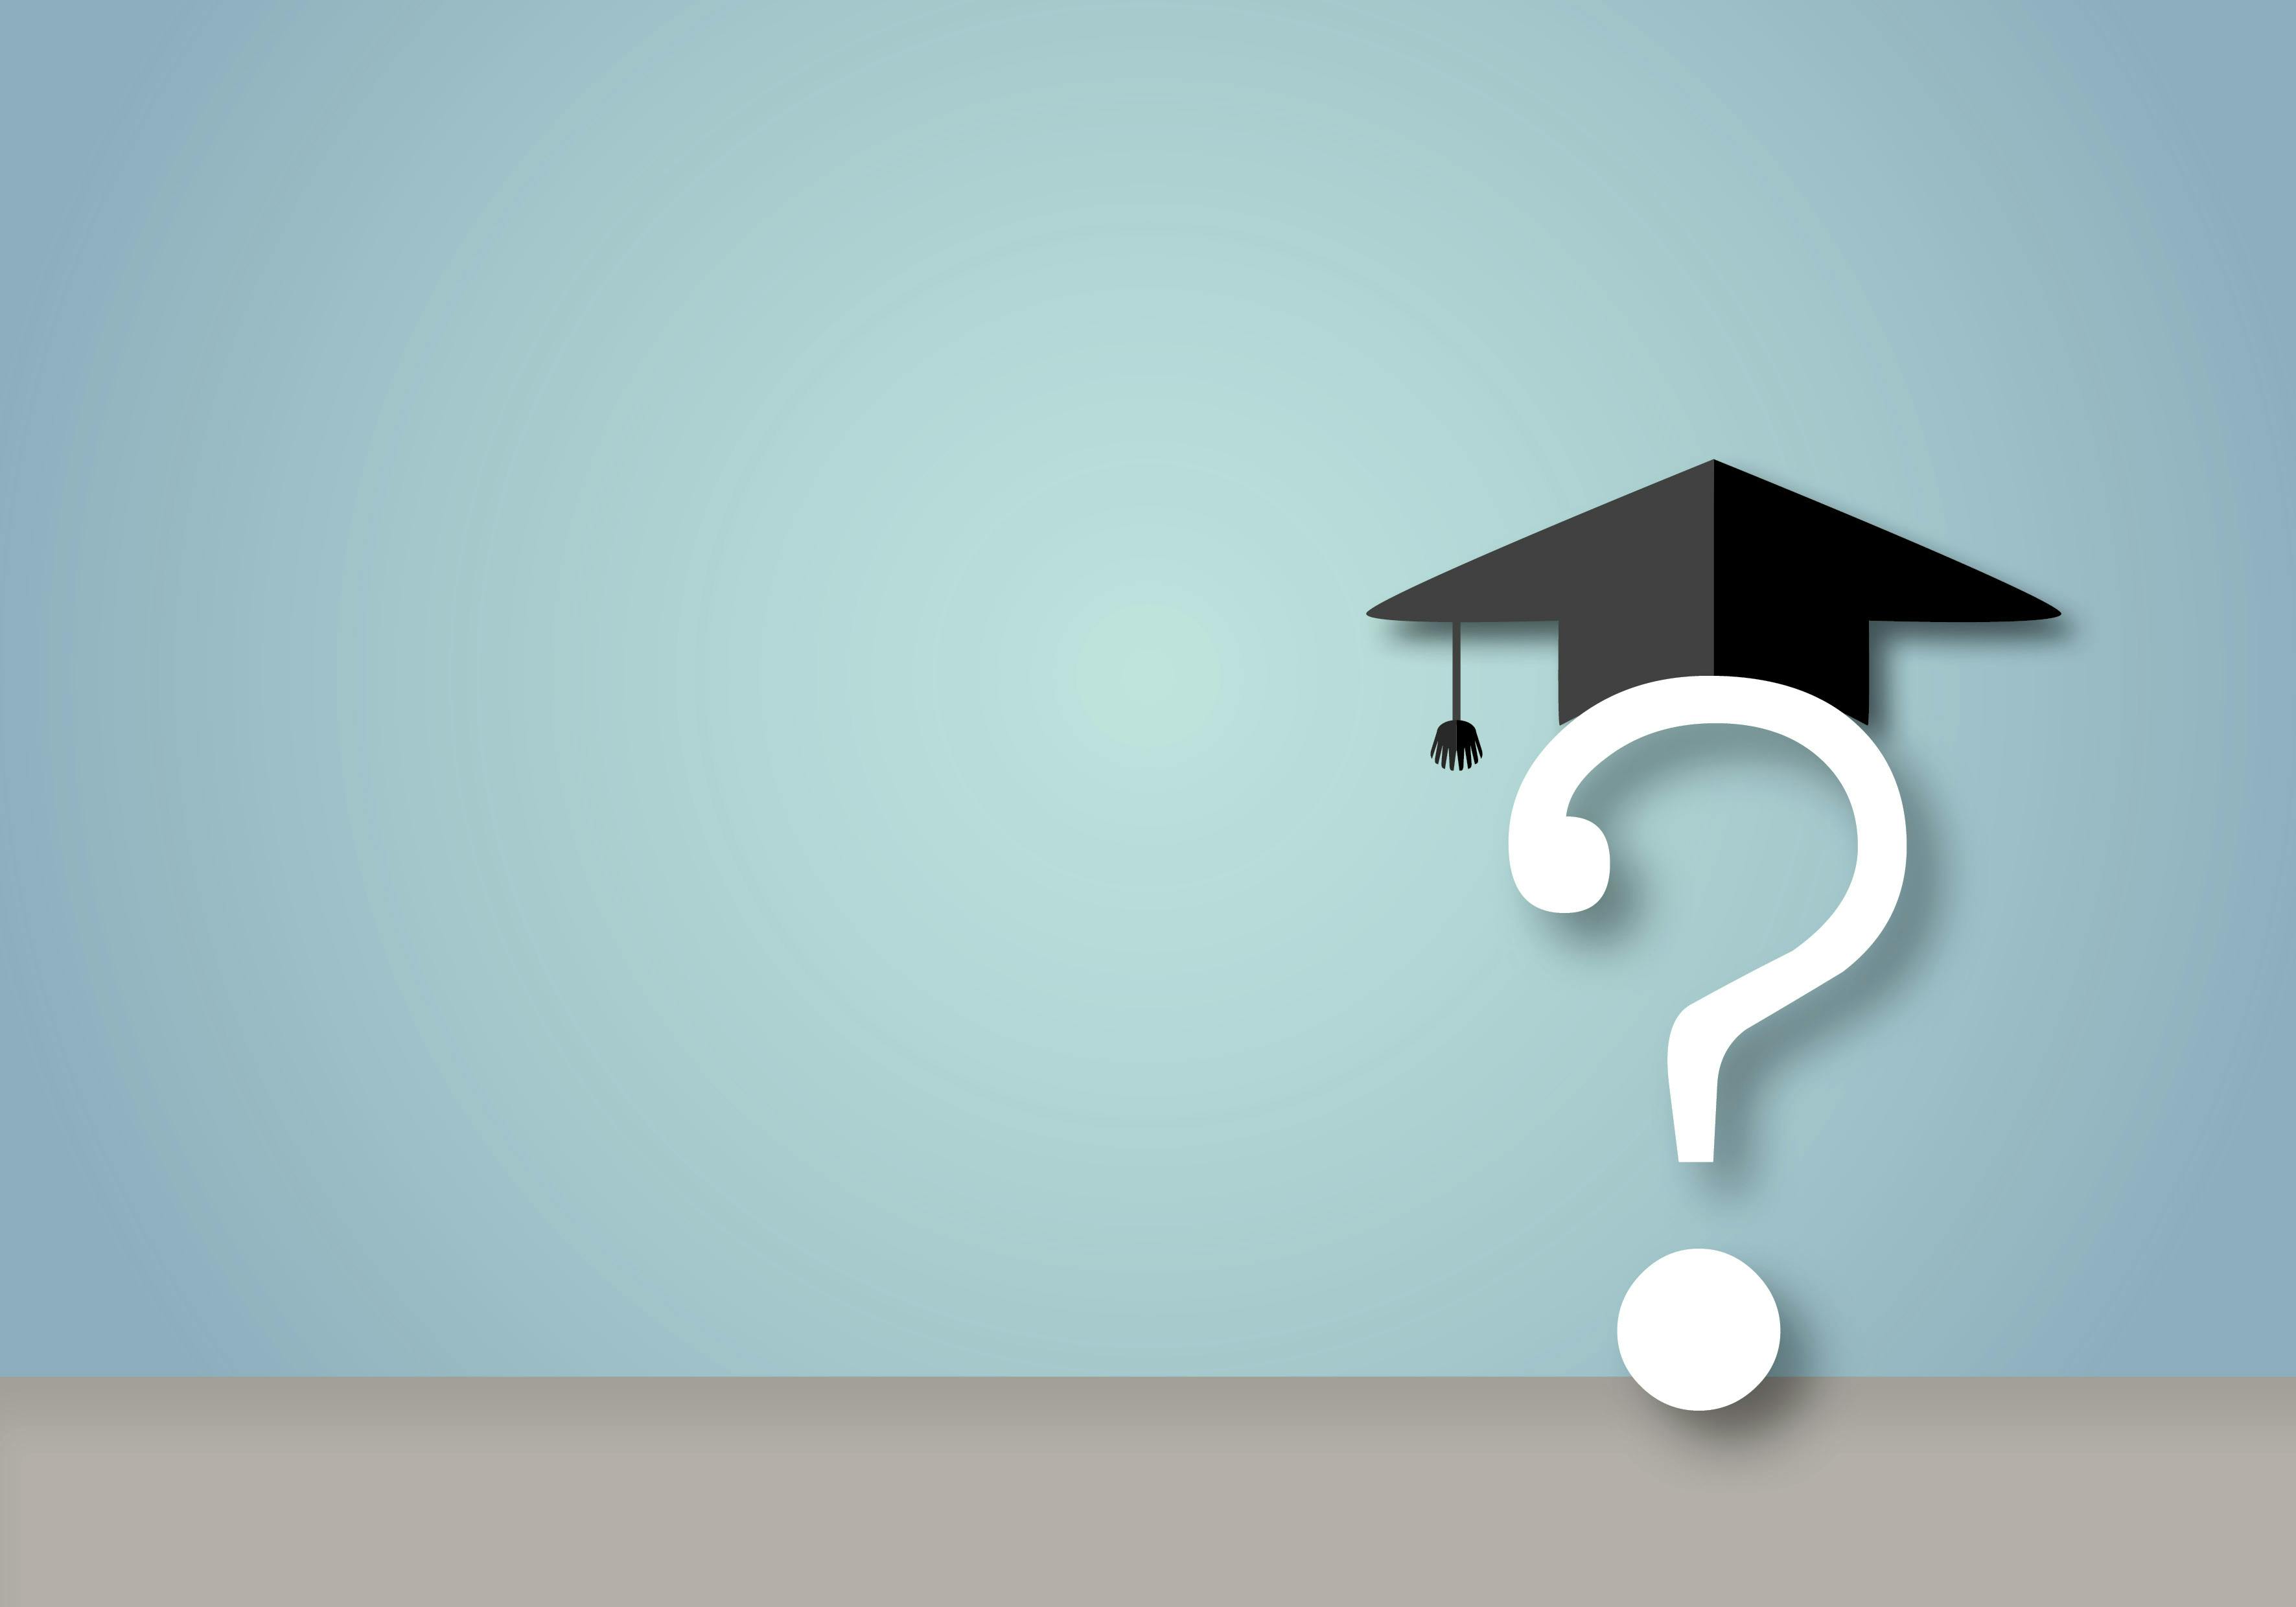 Should High School Graduation Be Redefined?